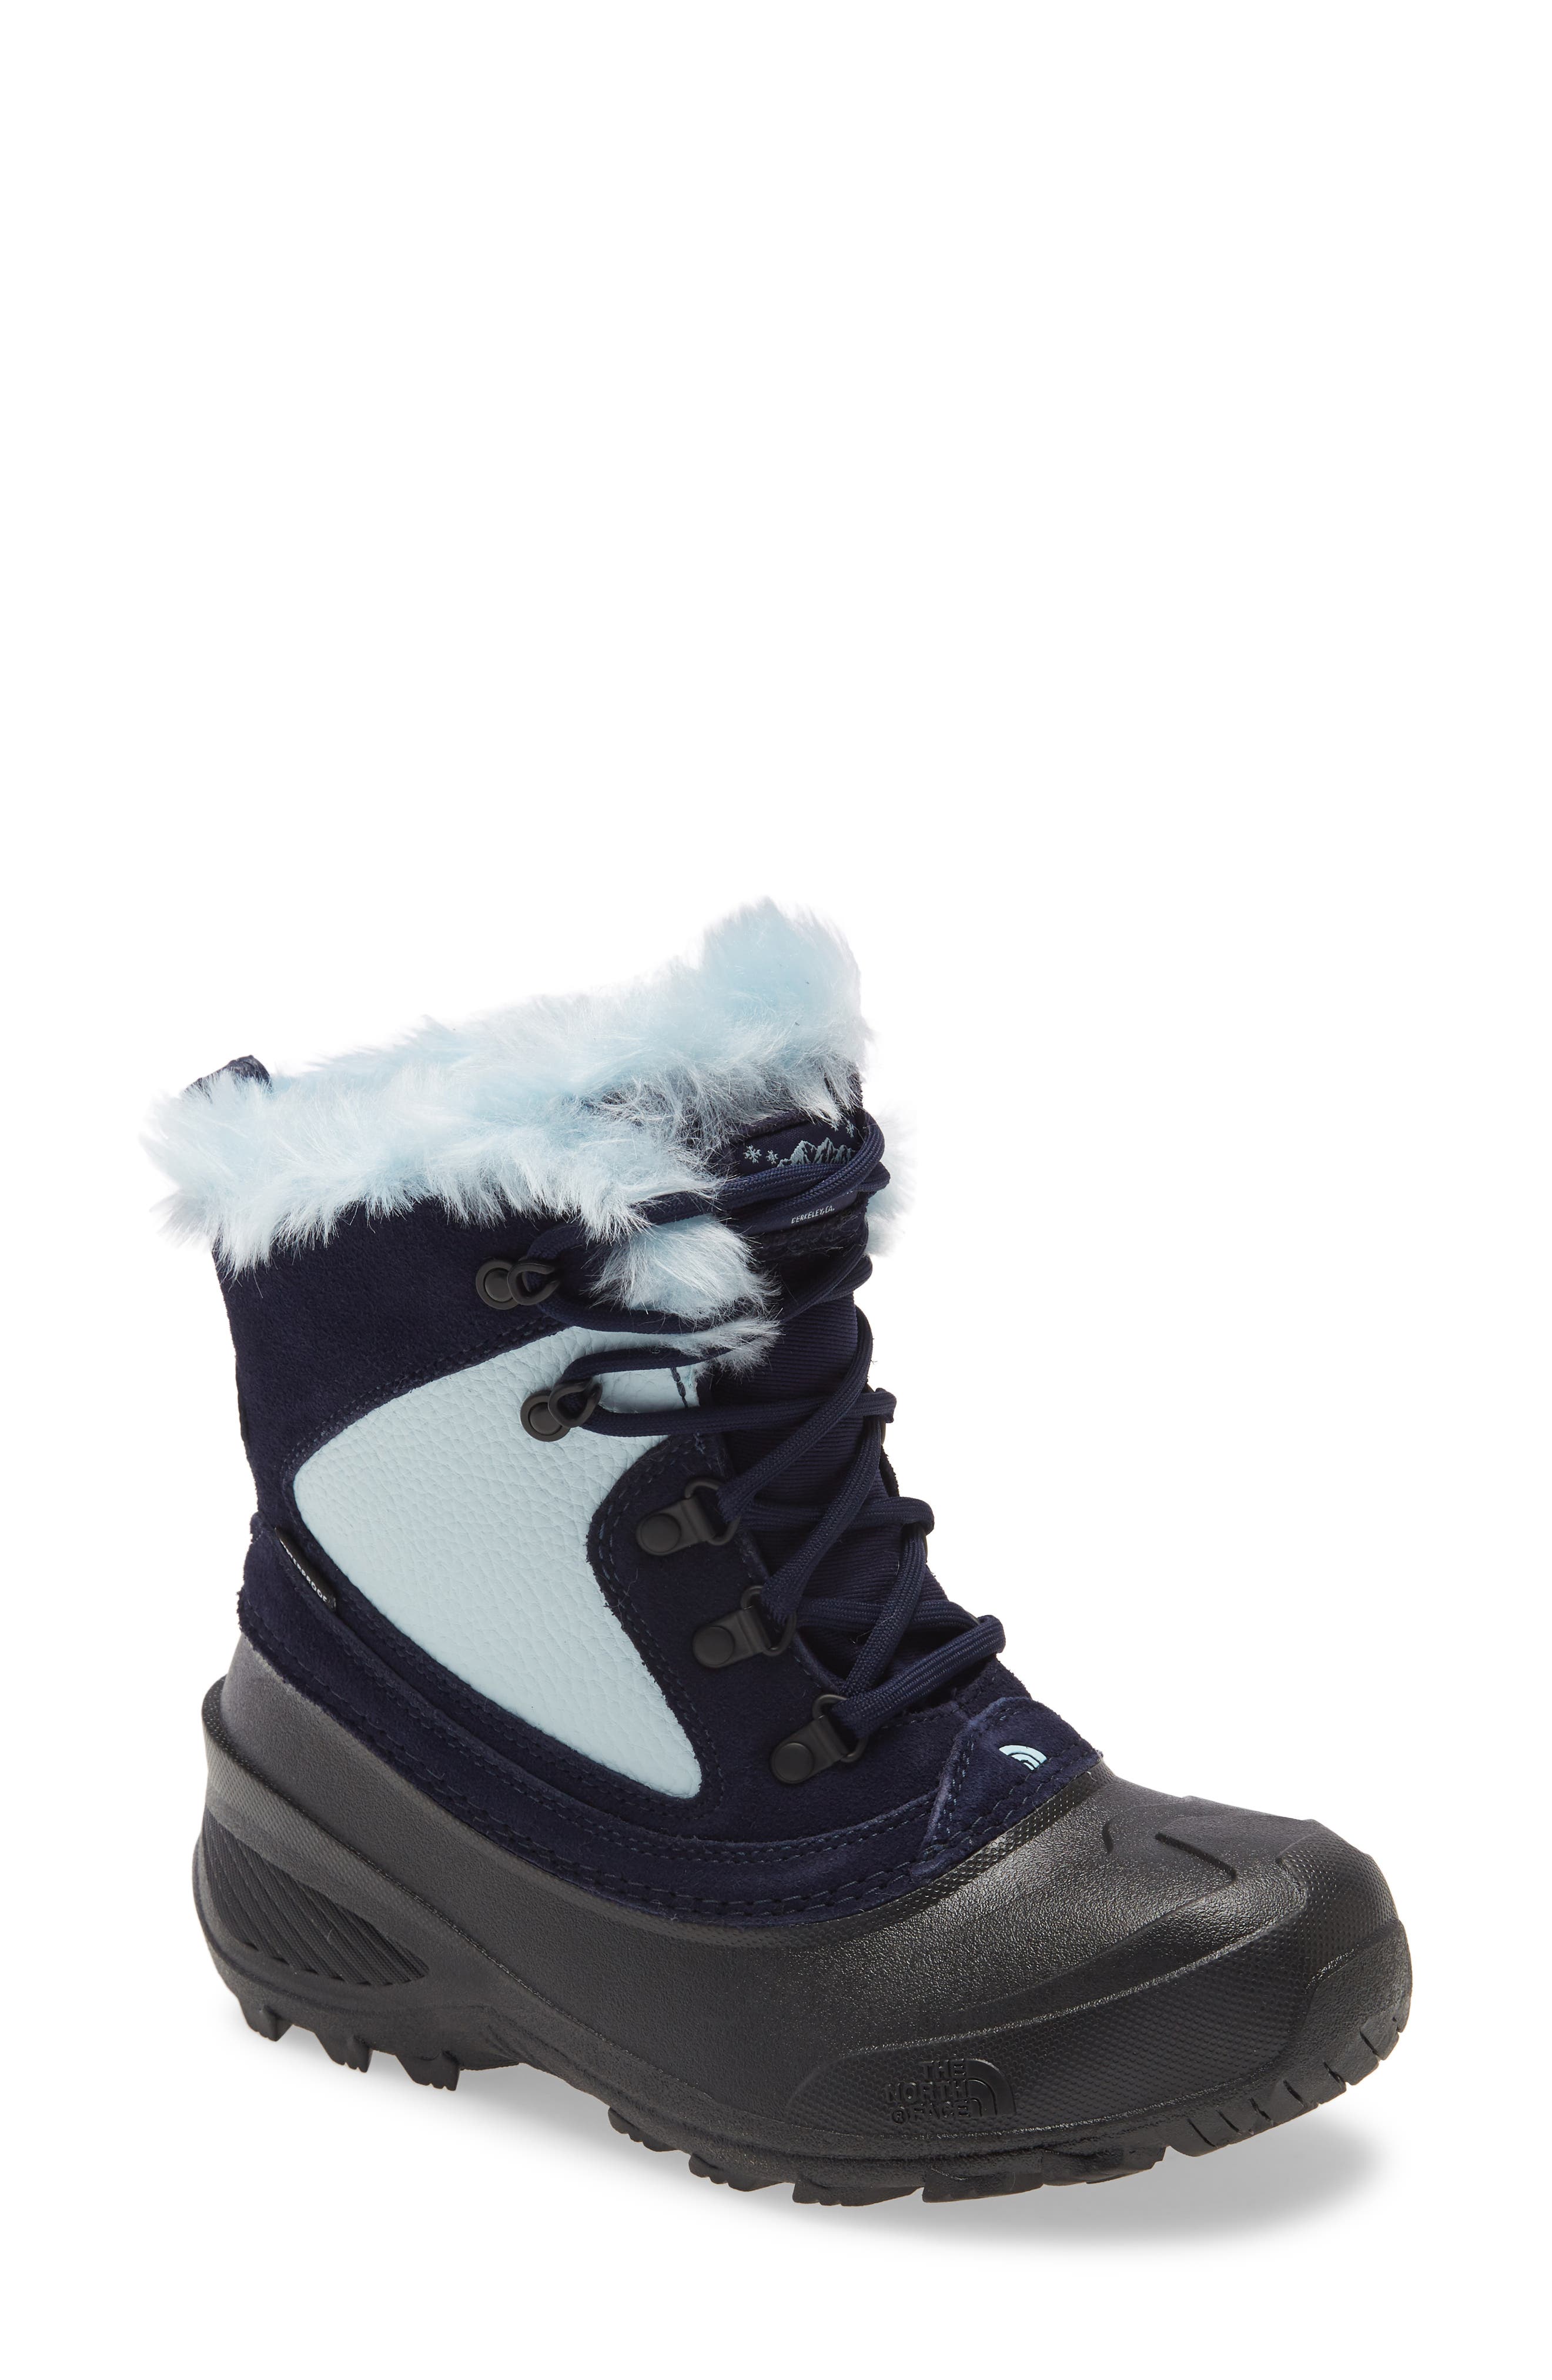 north face girls shoes